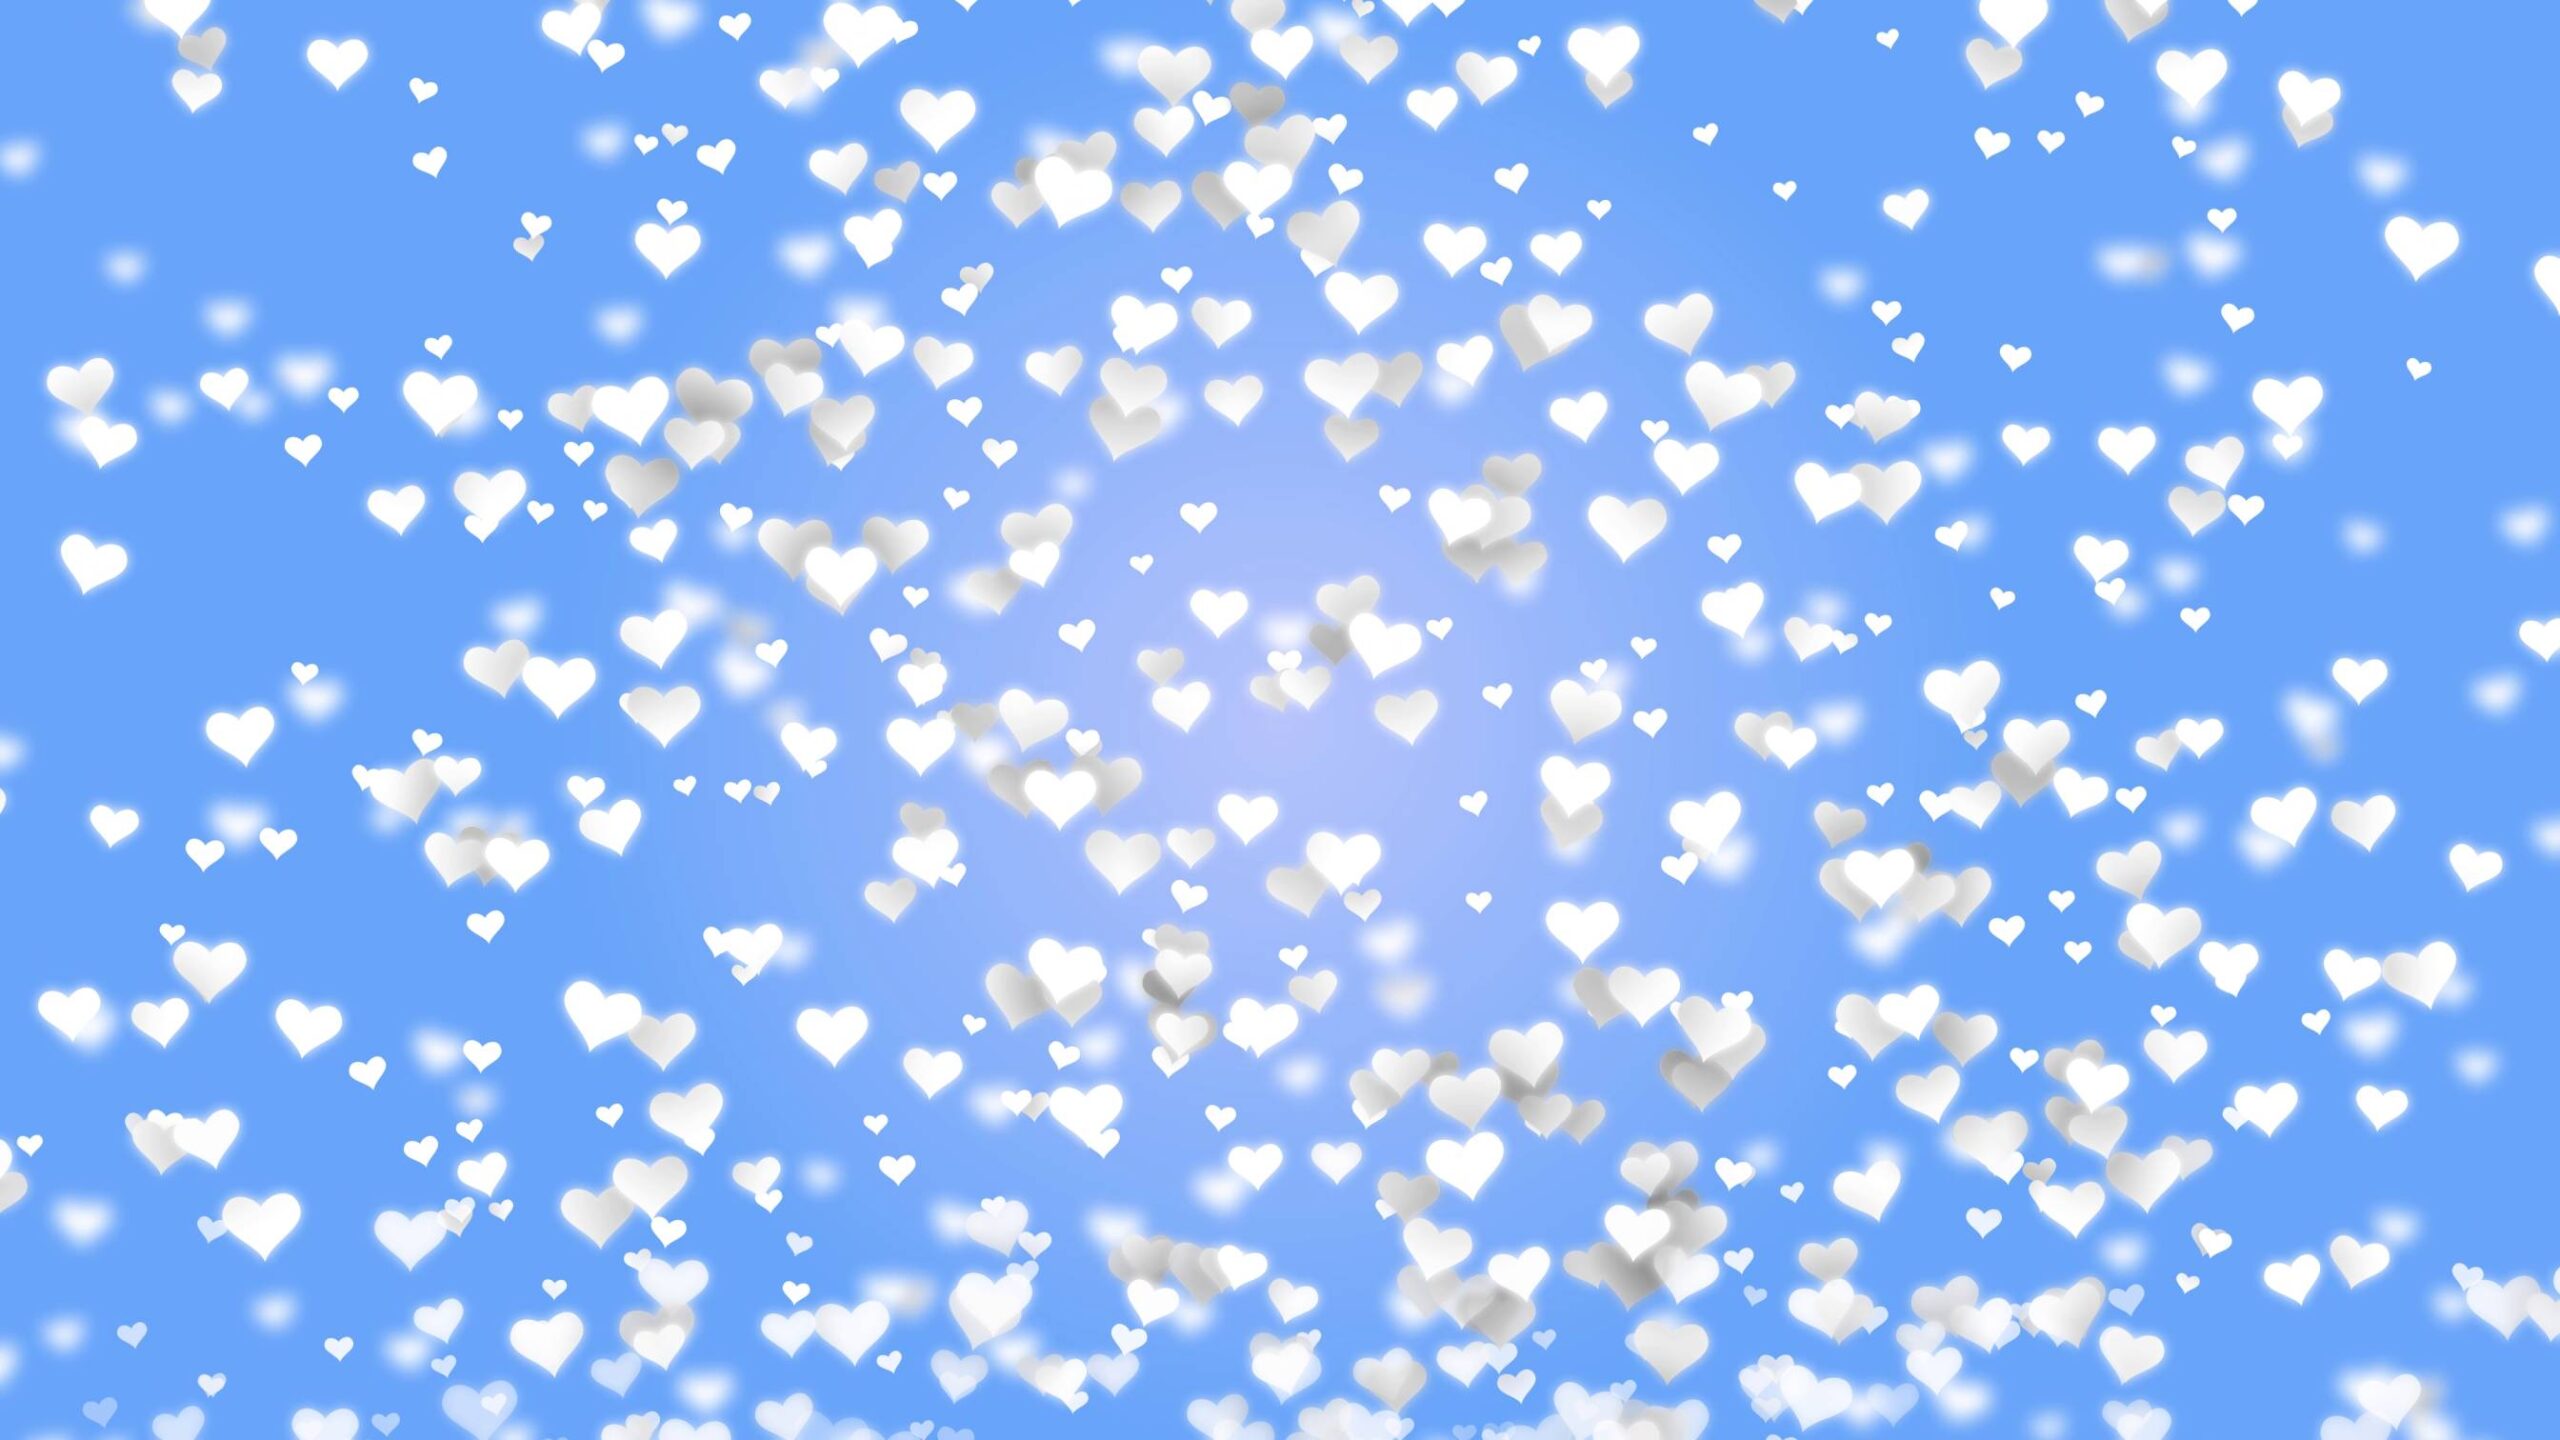 4K White Hearts Screensaver || FREE DOWNLOAD || Valentine’s Day Motion Background